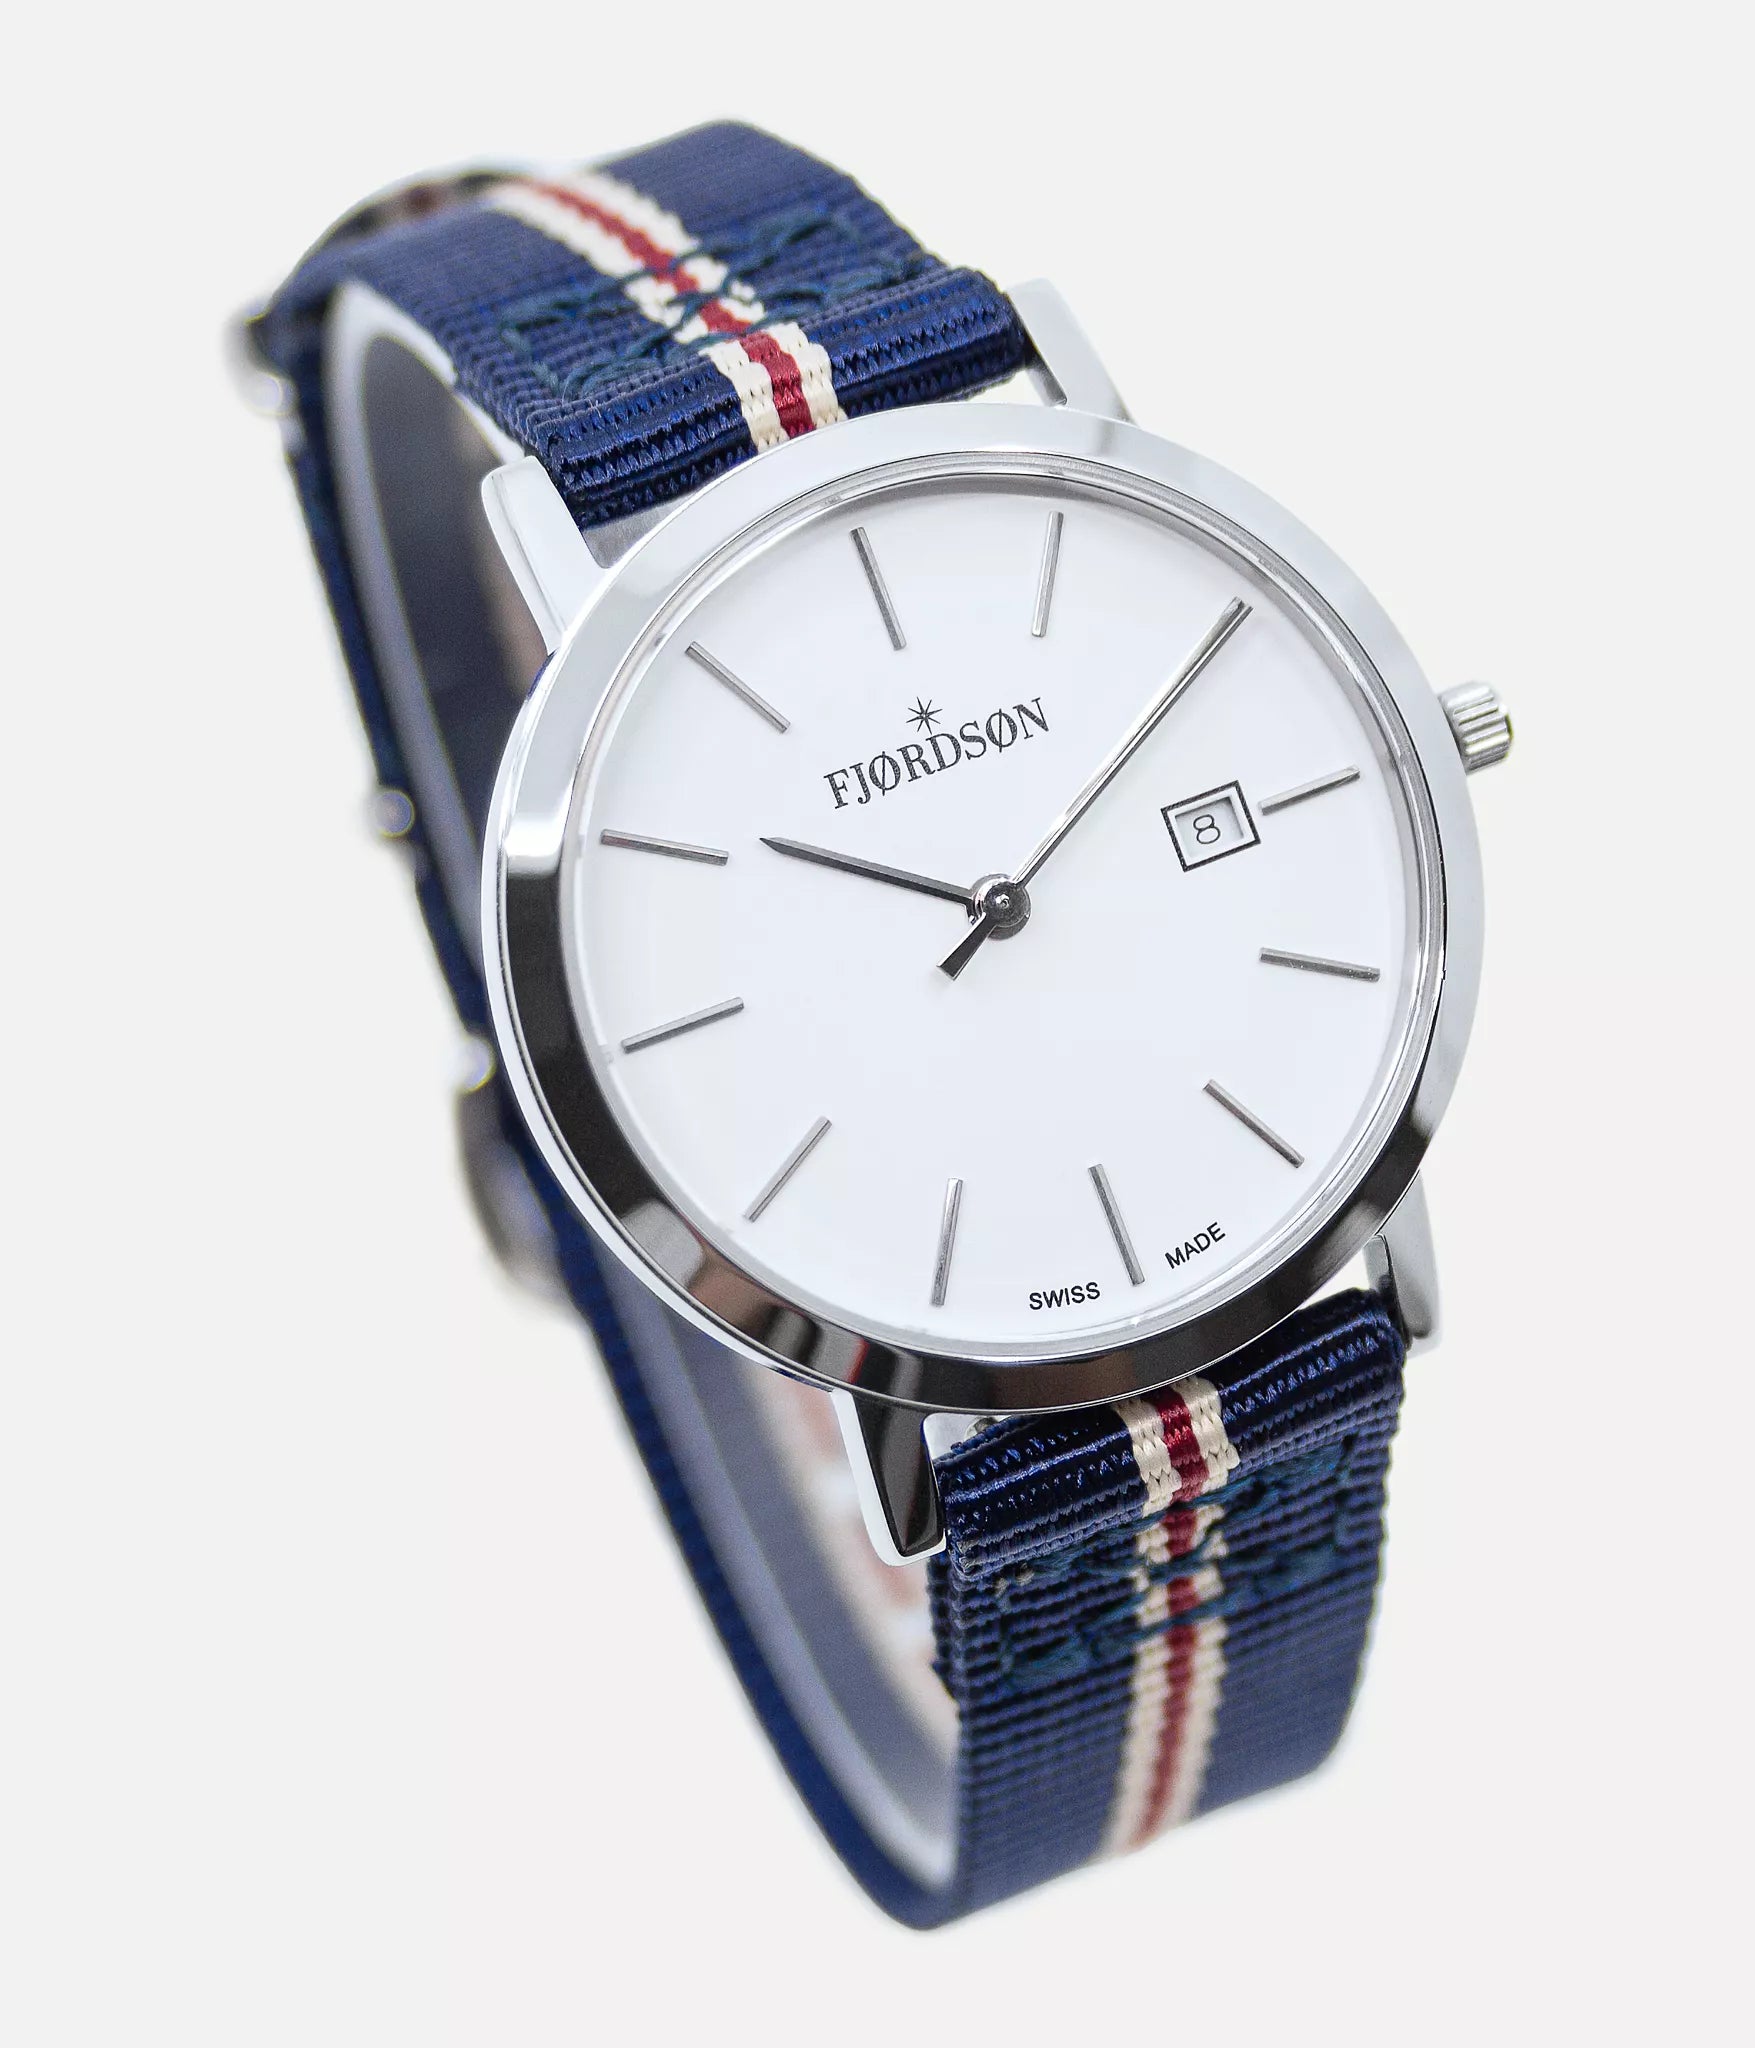 Side shot - Fjordson watch with white dial and navy blue & red striped NATO nylon watch strap - Women's Watch - vegan & approved by PETA - Swiss made